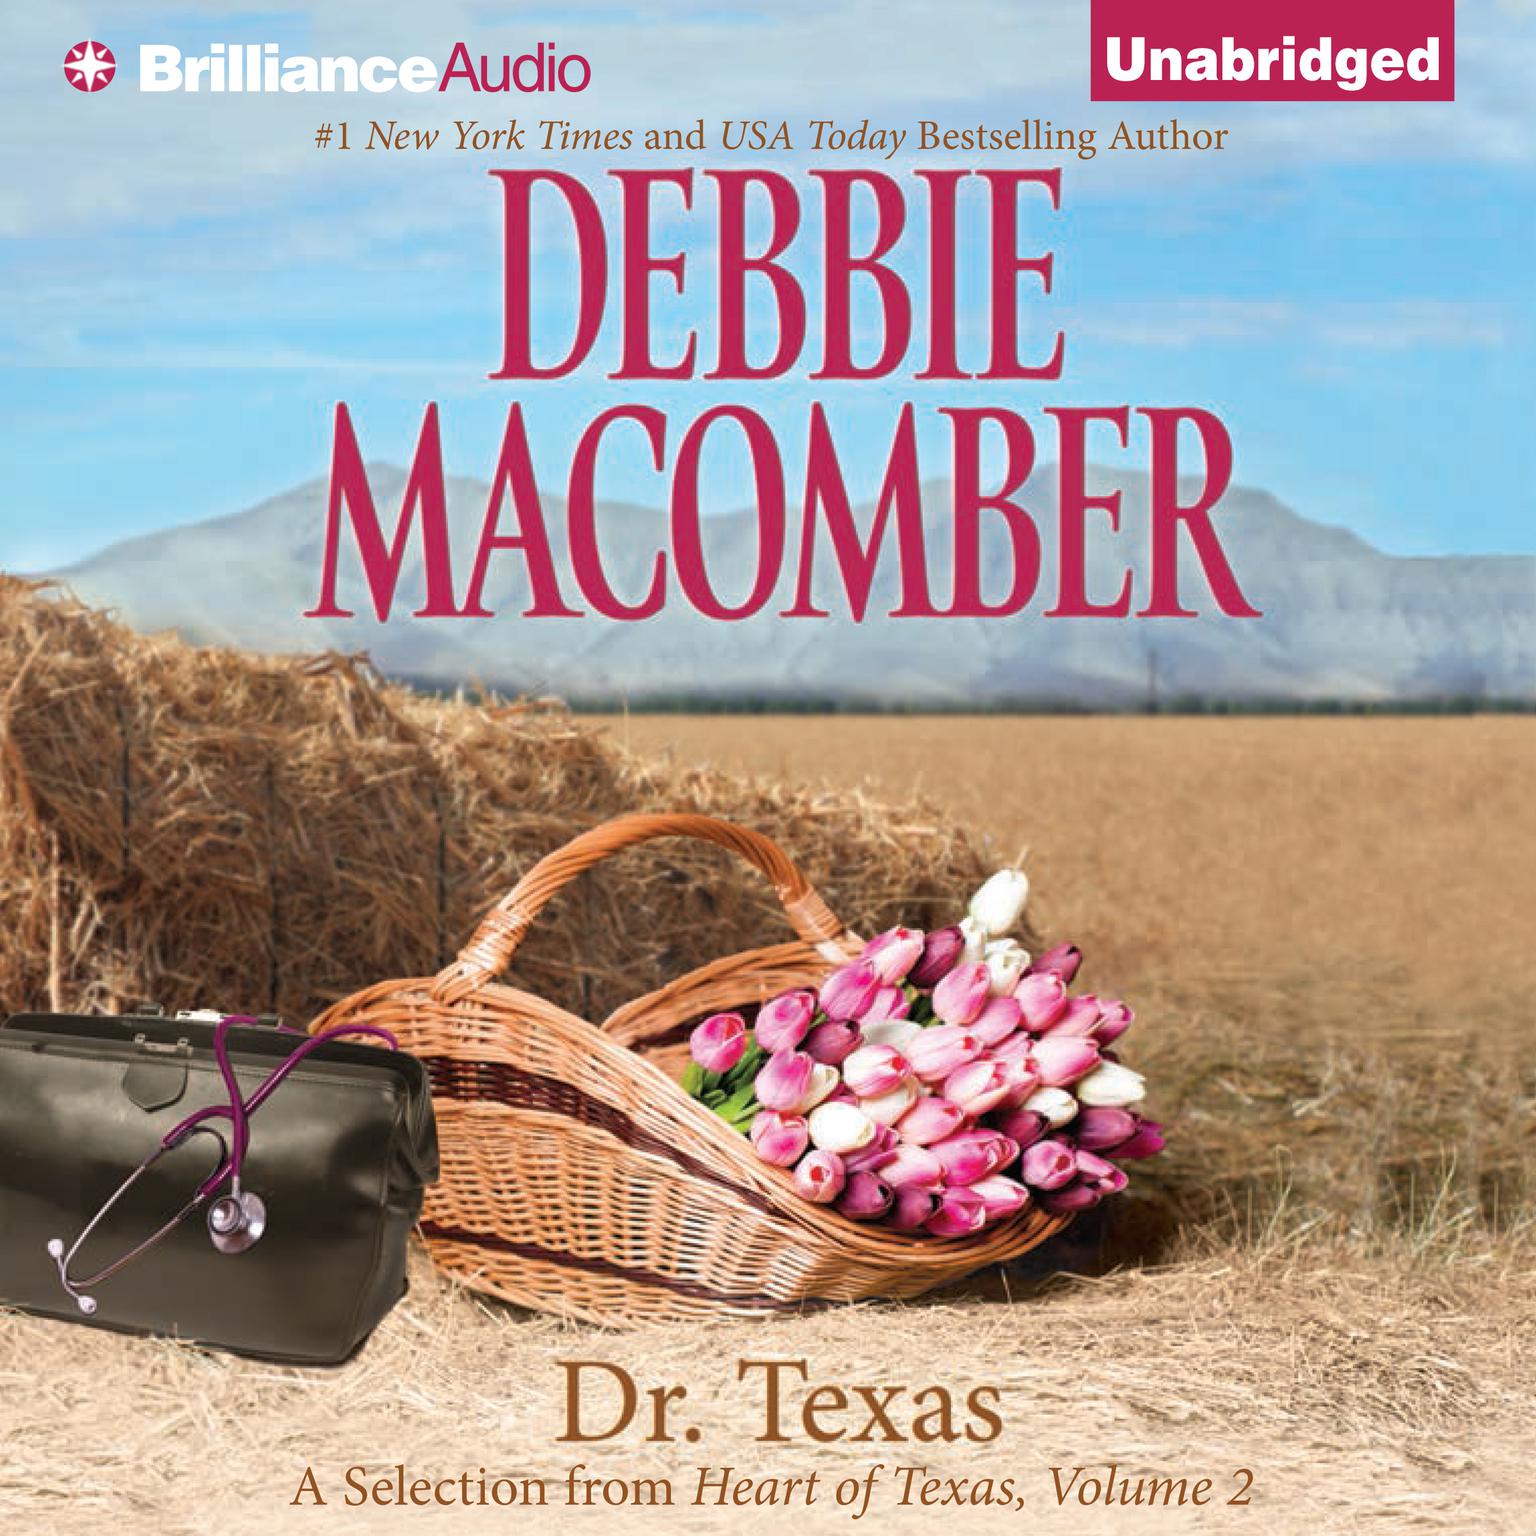 Dr. Texas: A Selection from Heart of Texas, Volume 2 Audiobook, by Debbie Macomber